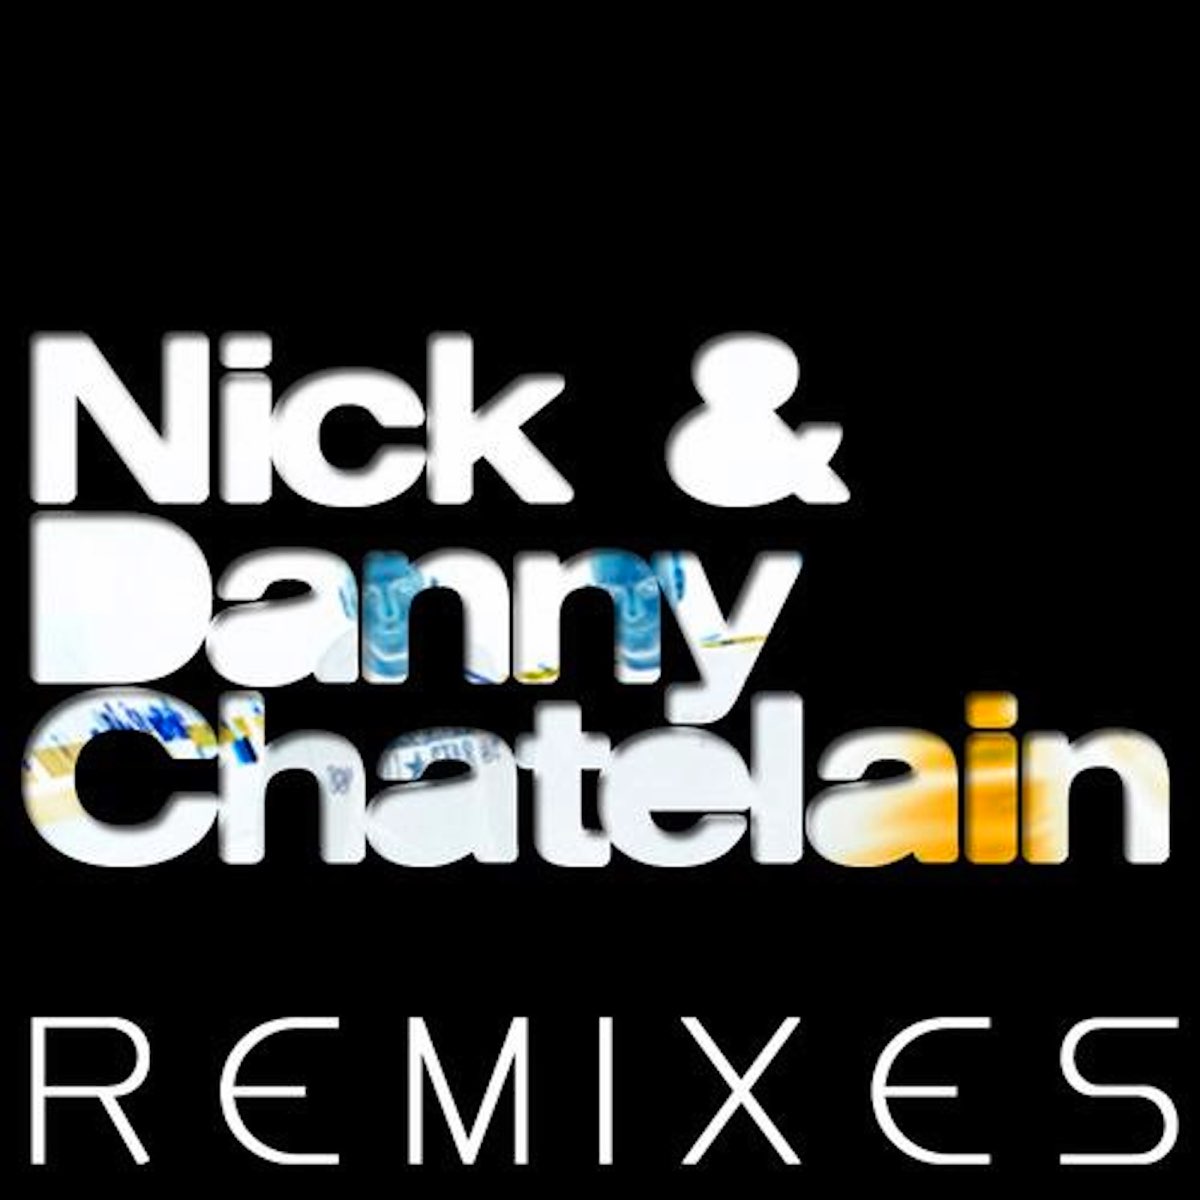 Nick and Danny Chatelain - por eso (d-formation Remix).